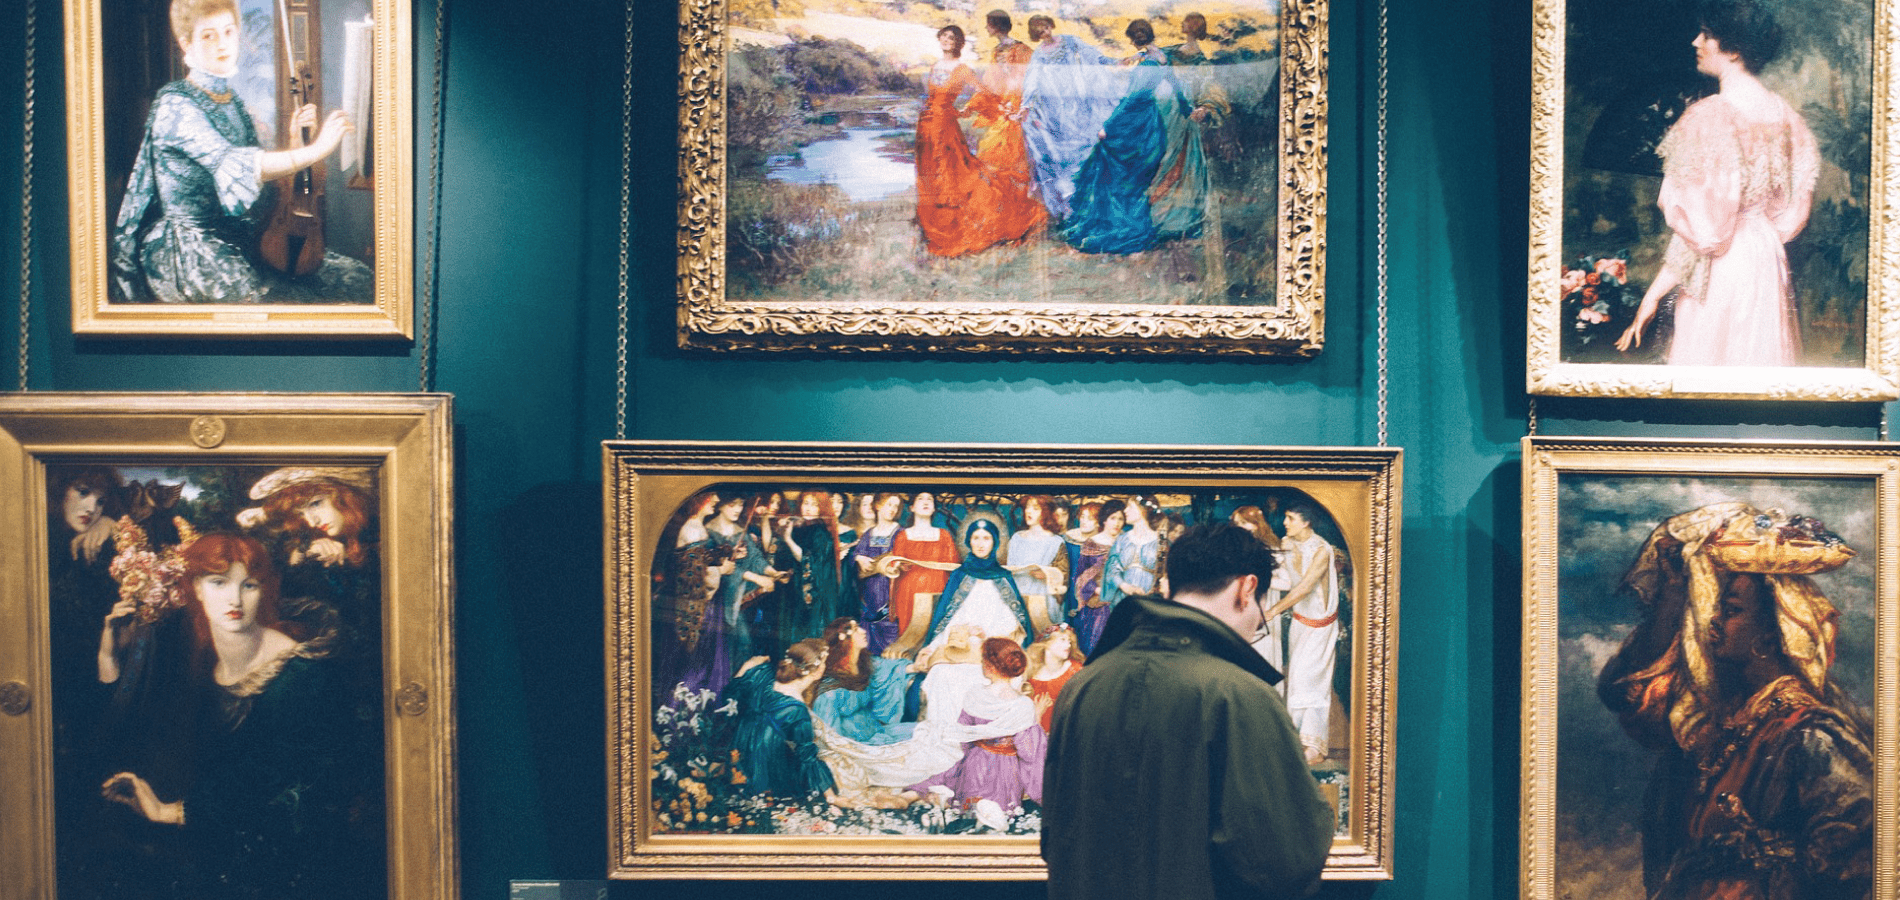 Man standing in front of paintings in a museum